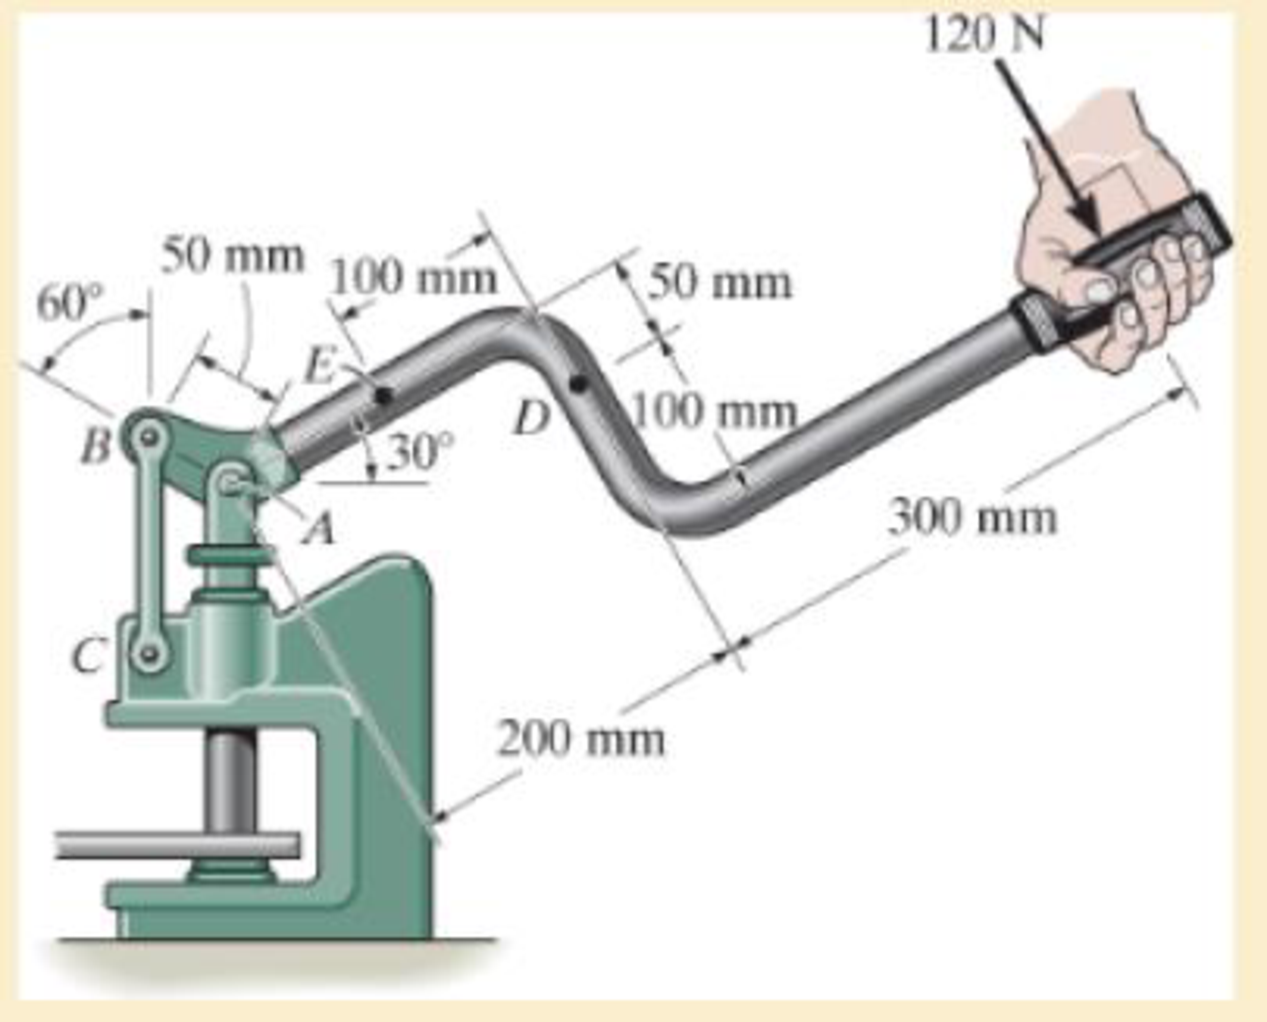 Chapter 1.2, Problem 1.22P, The metal stud punch is subjected to a force of 120 N on the handle. Determine the magnitude of the 